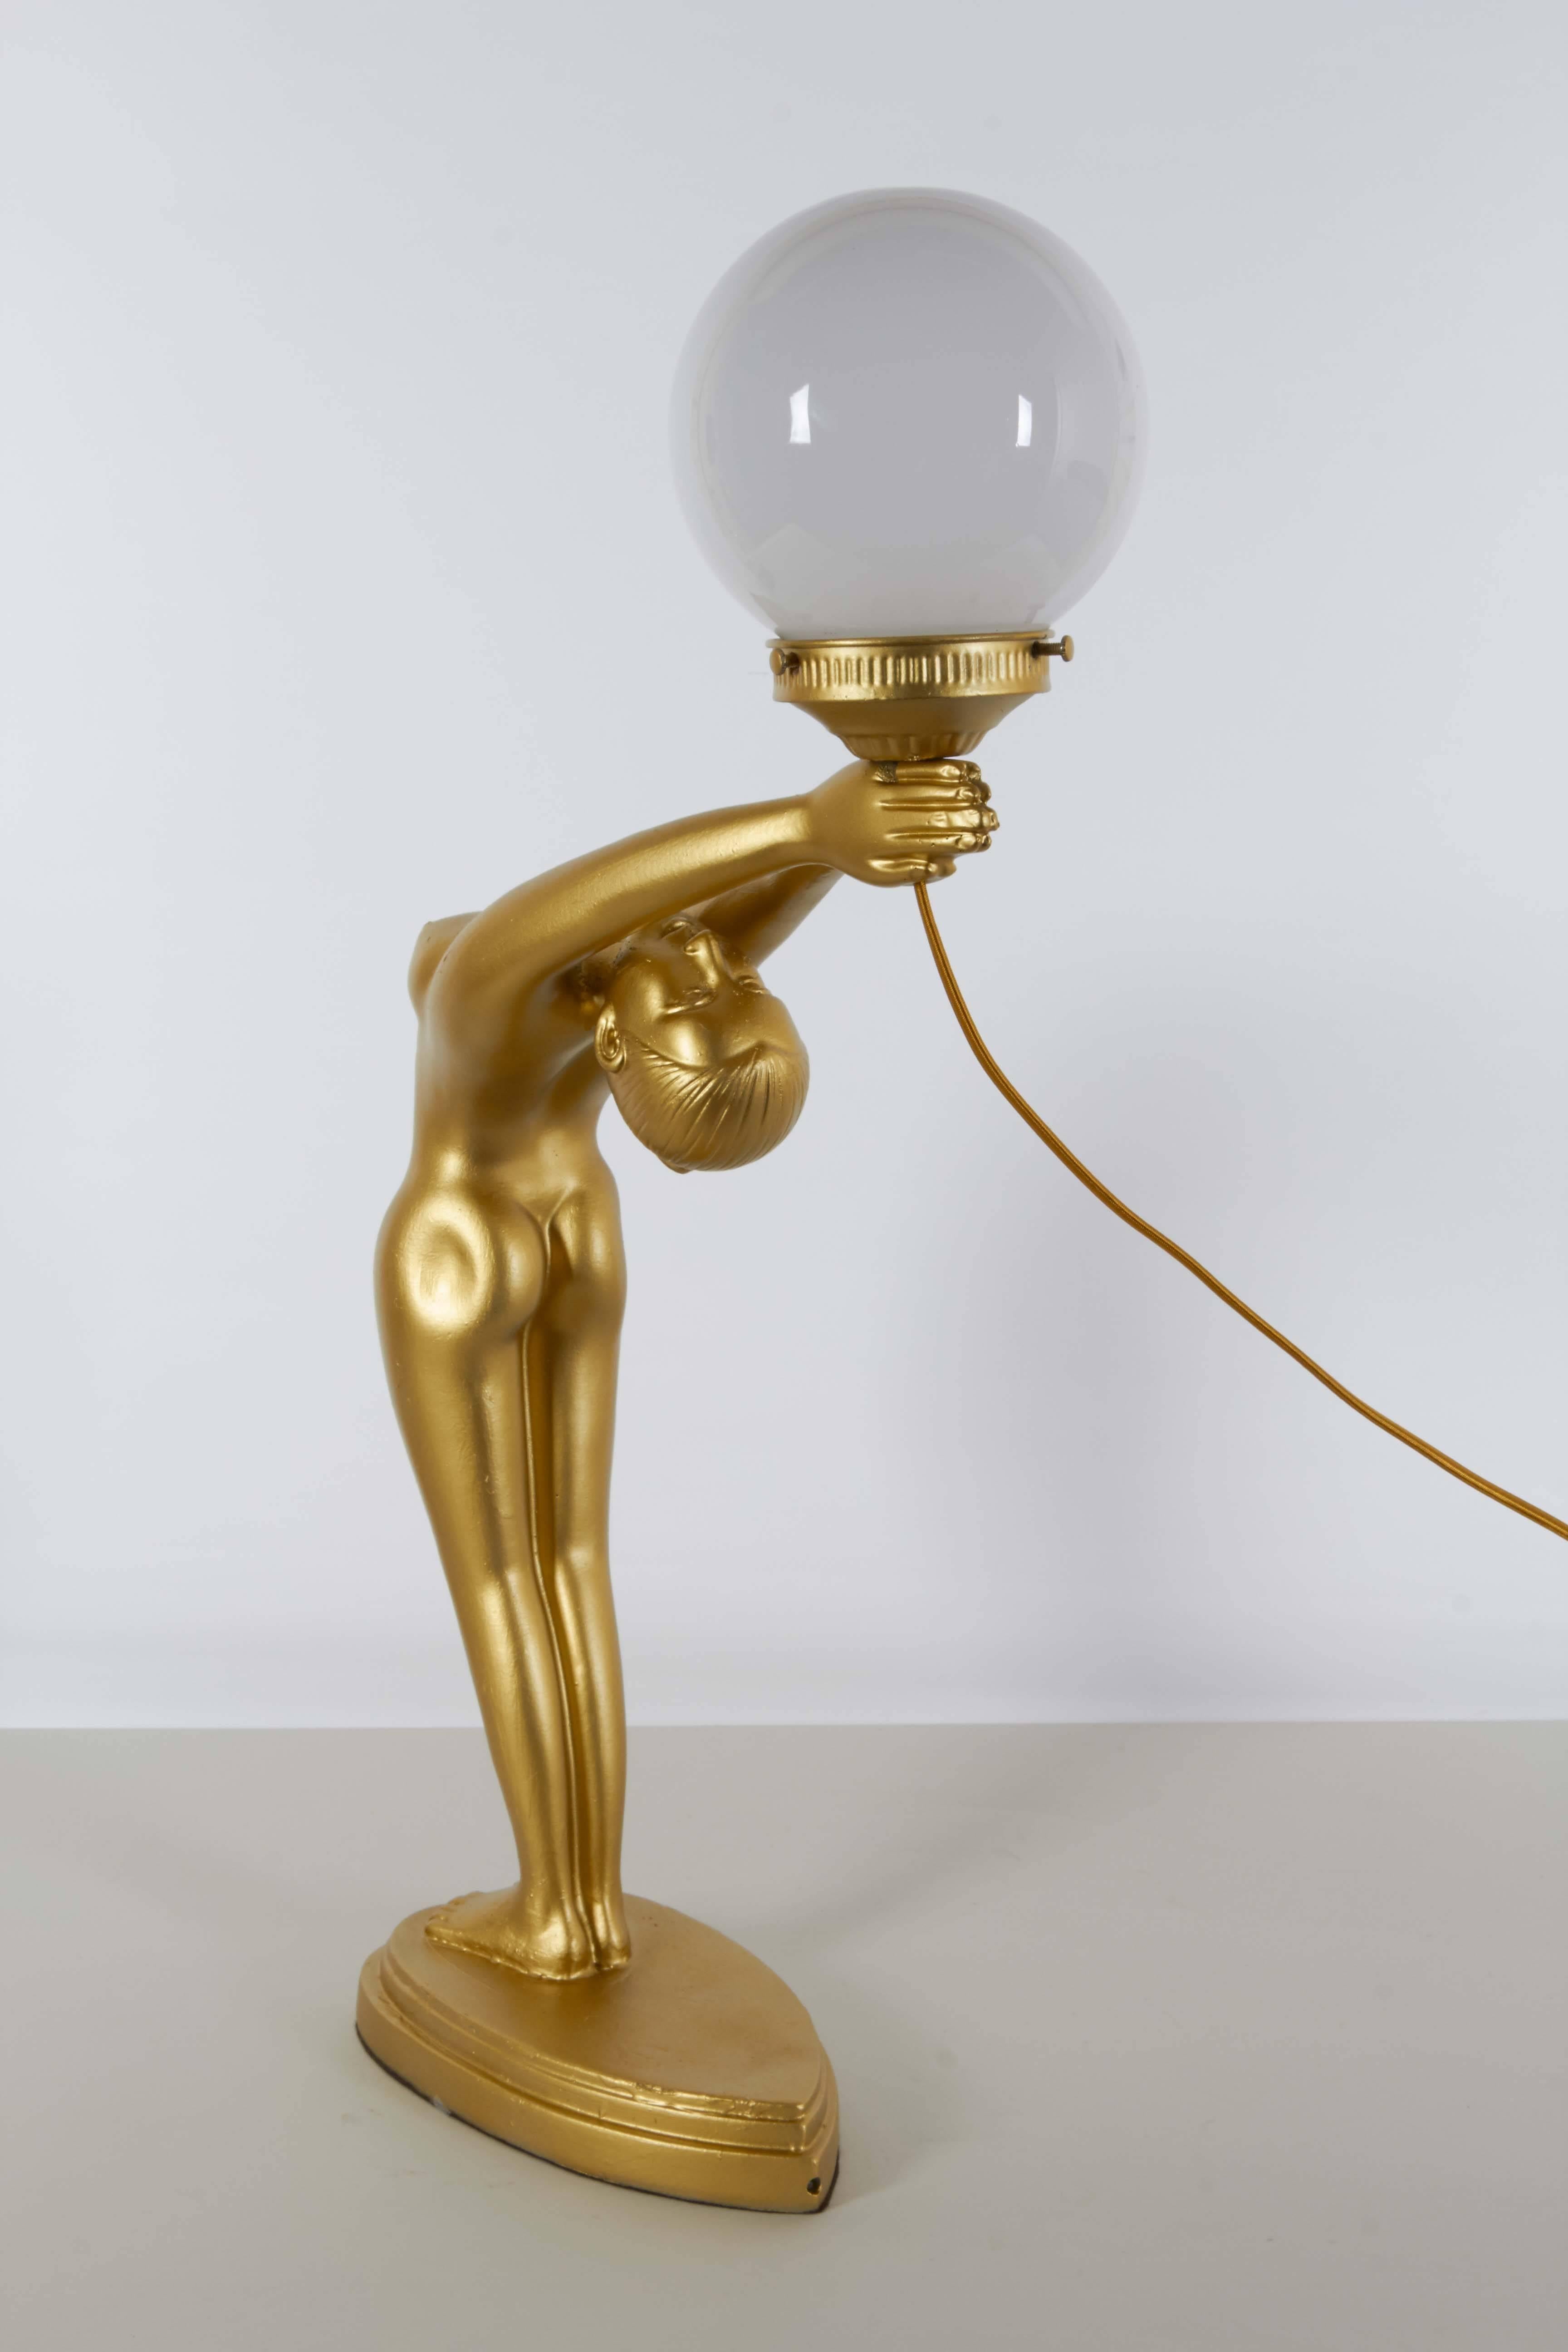 Pair of Figural Art Deco Style Lamps in the Manner of Max Le Verrier 1